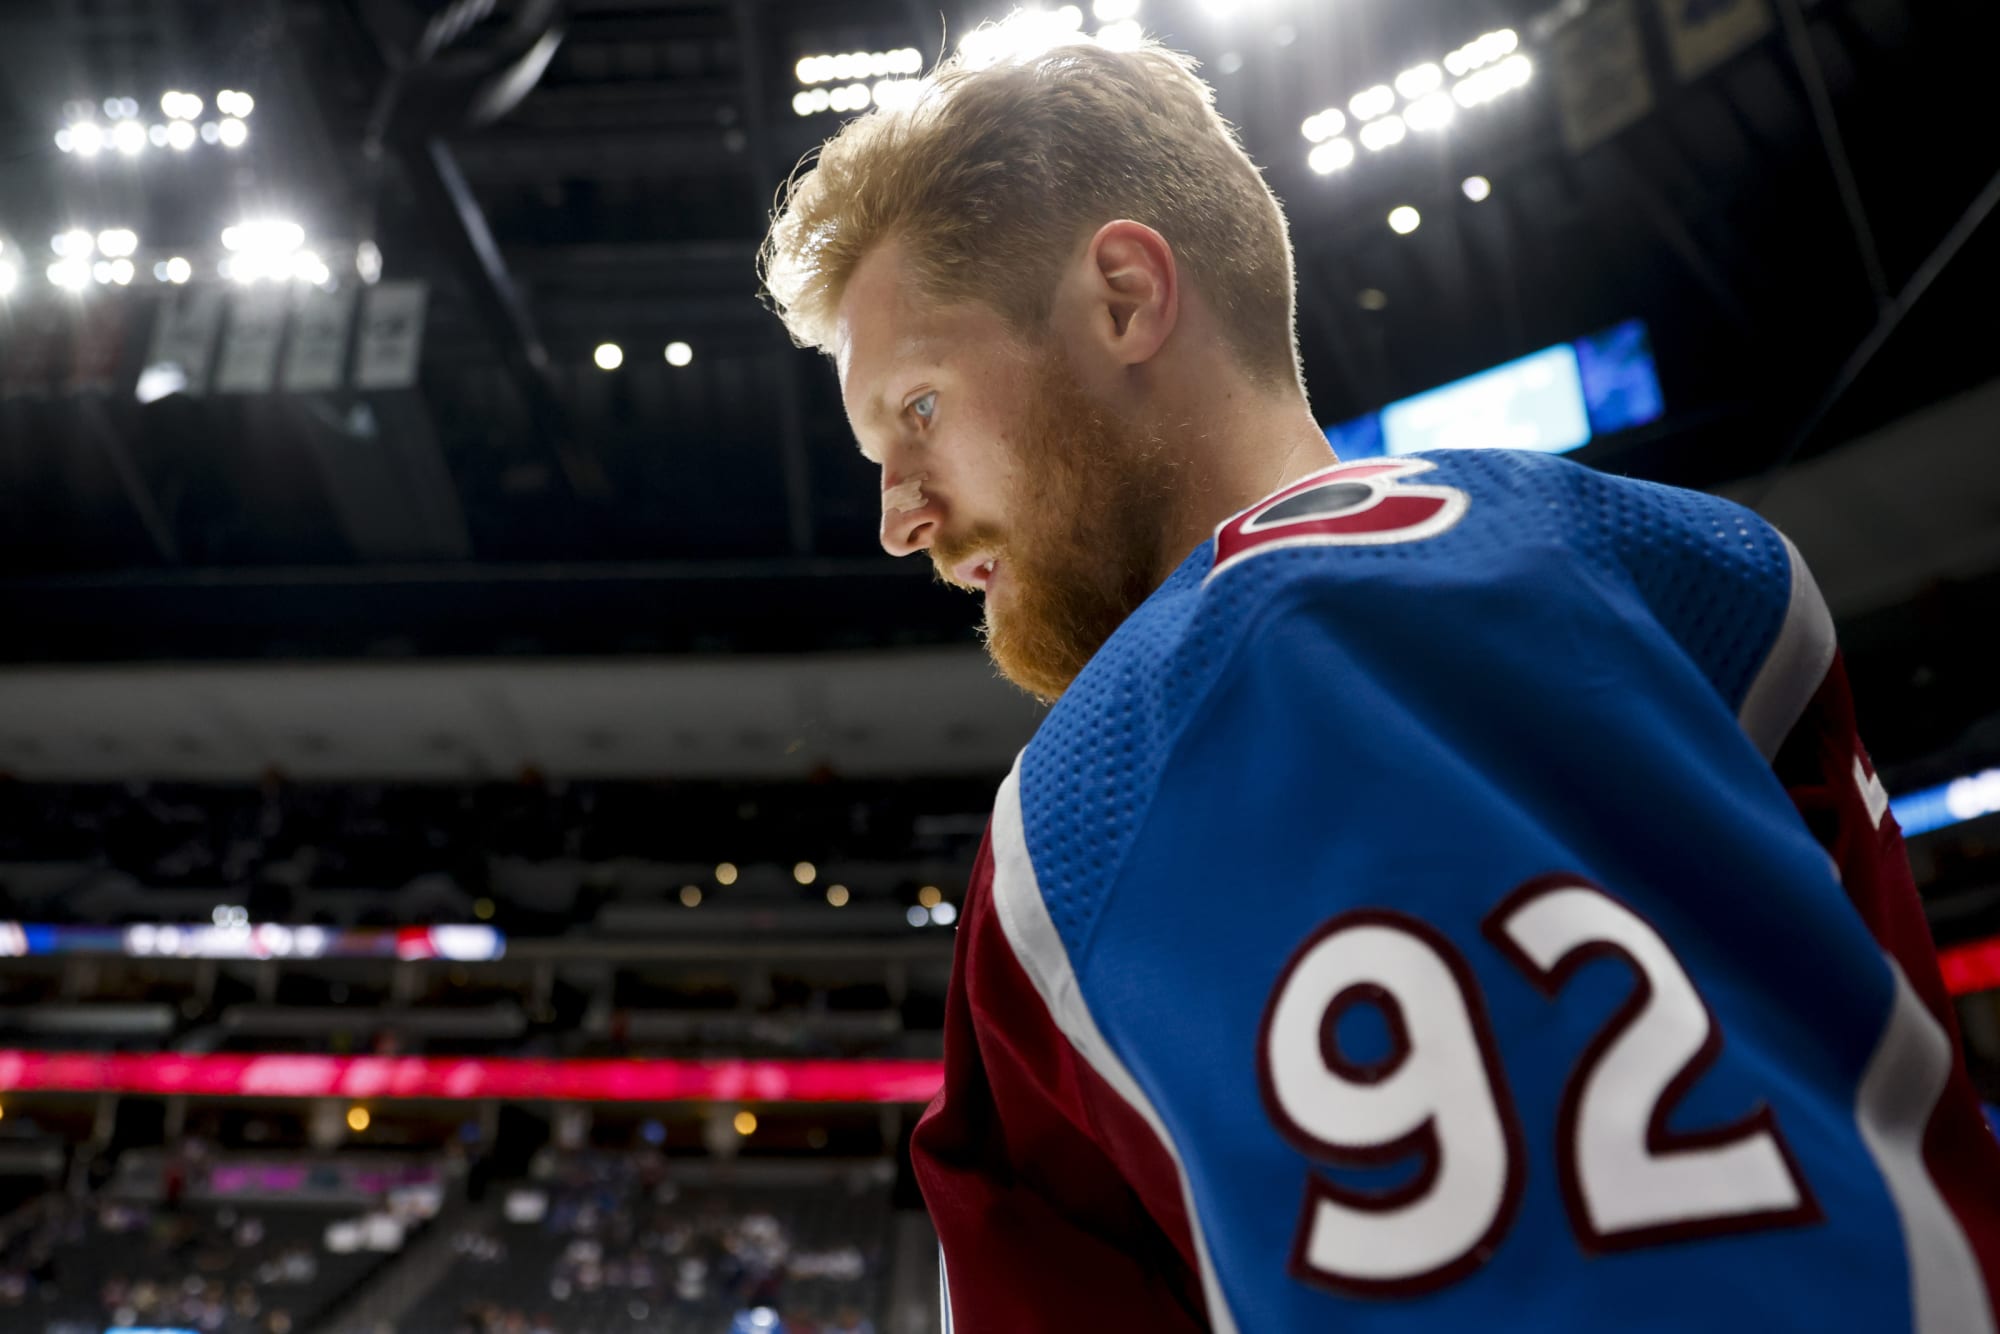 Colorado Avalanche without Gabriel Landeskog, who will wear the C?